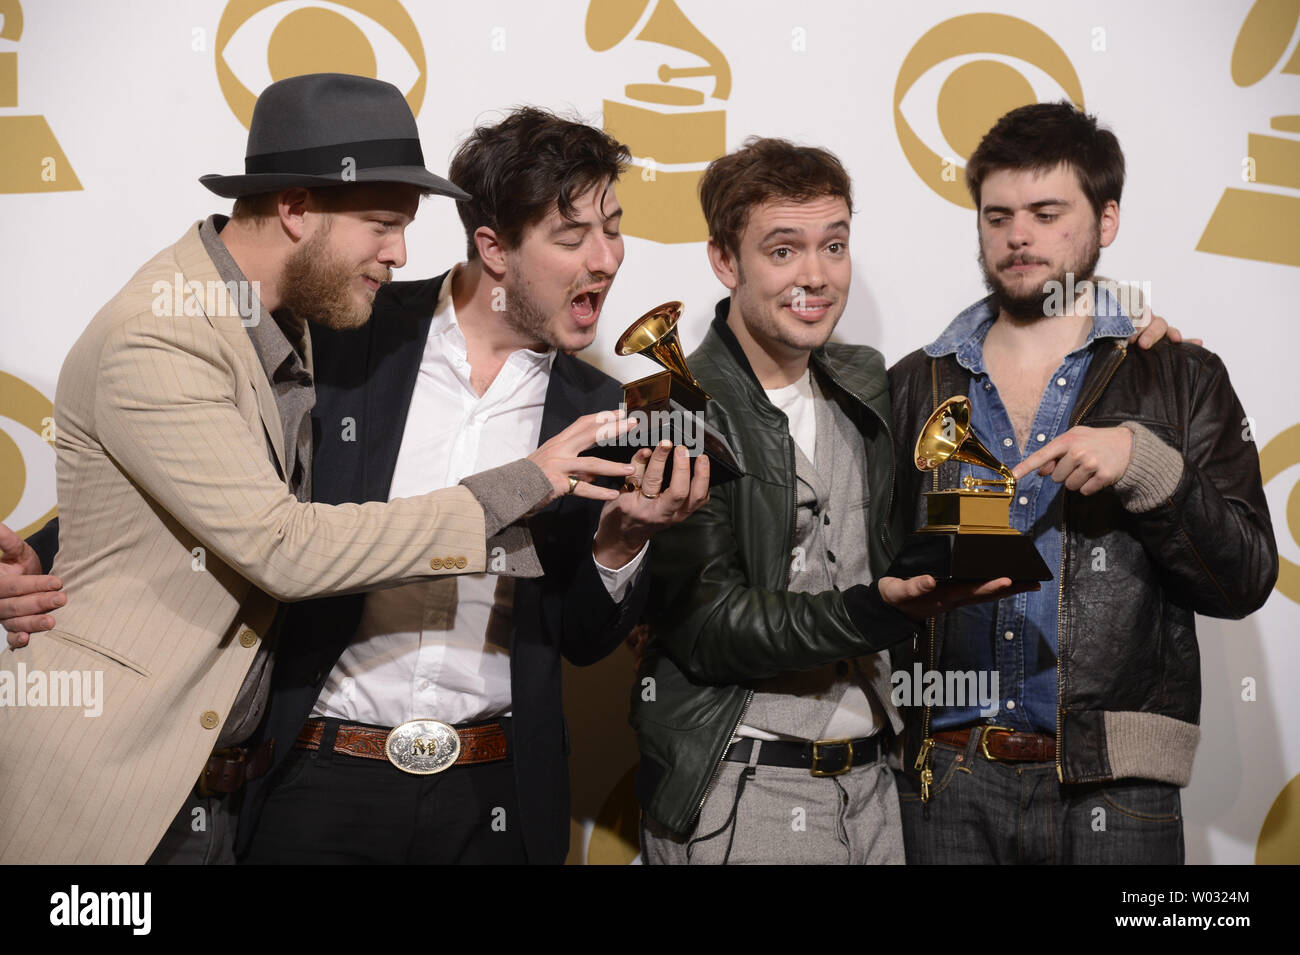 Mumford & Sons appears backstage with the Grammys they won at the 55th Grammy Awards at the Staples Center in Los Angeles on February 10, 2013.    UPI/Phil McCarten Stock Photo